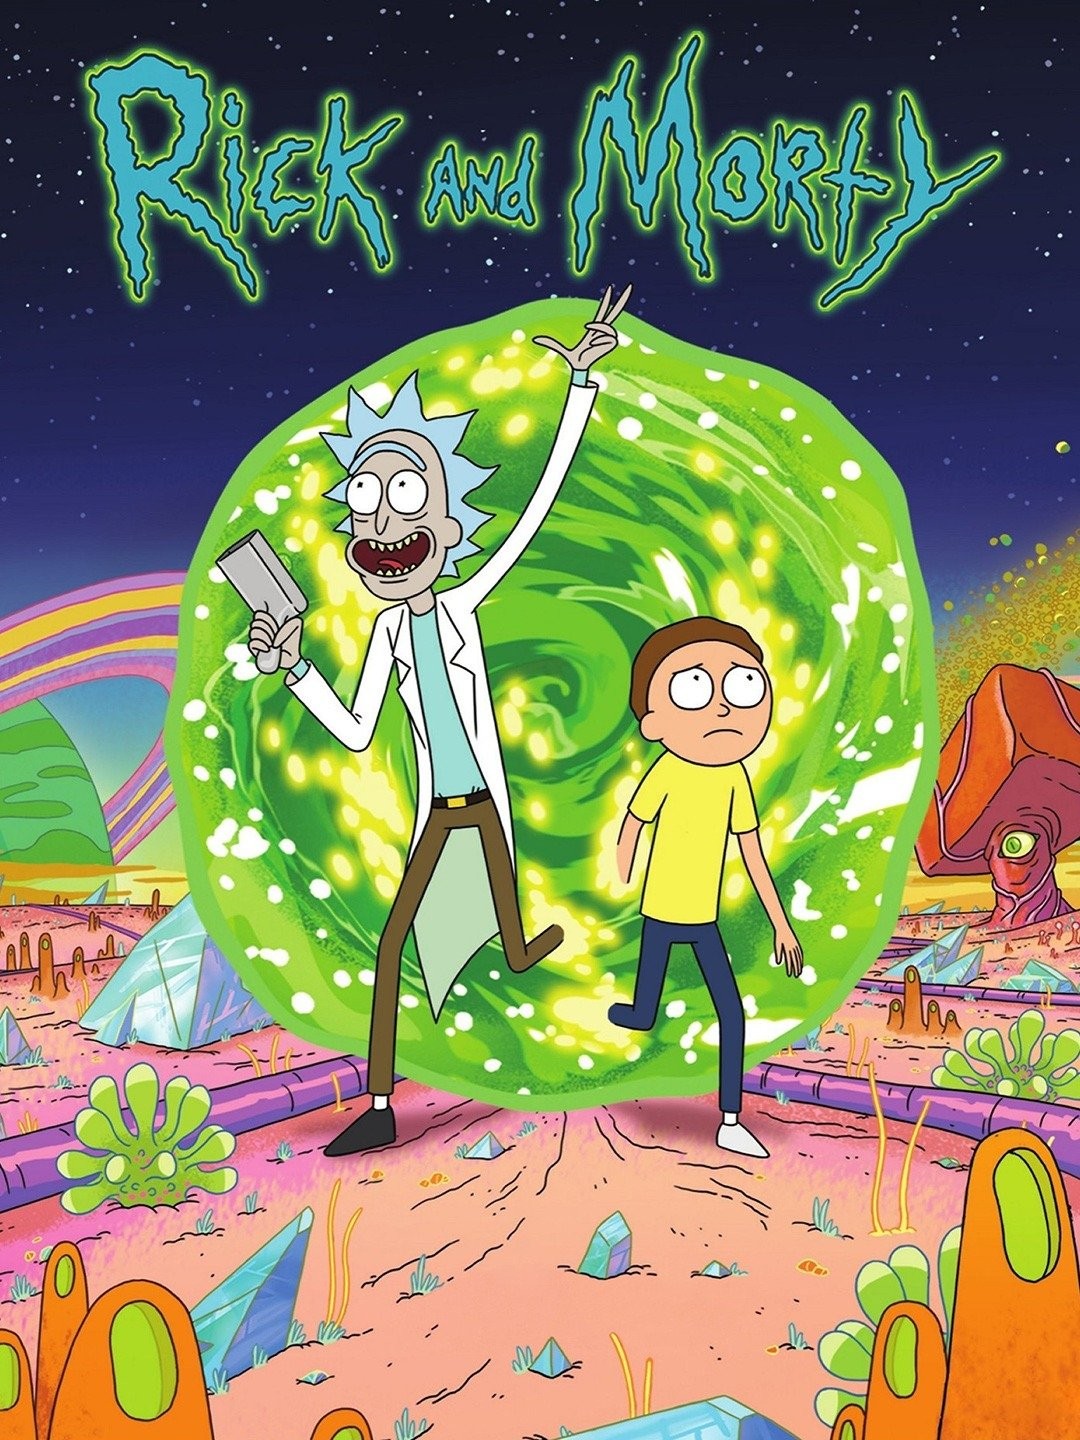 Rick and Morty: Season 7, Episode 1 - Rotten Tomatoes